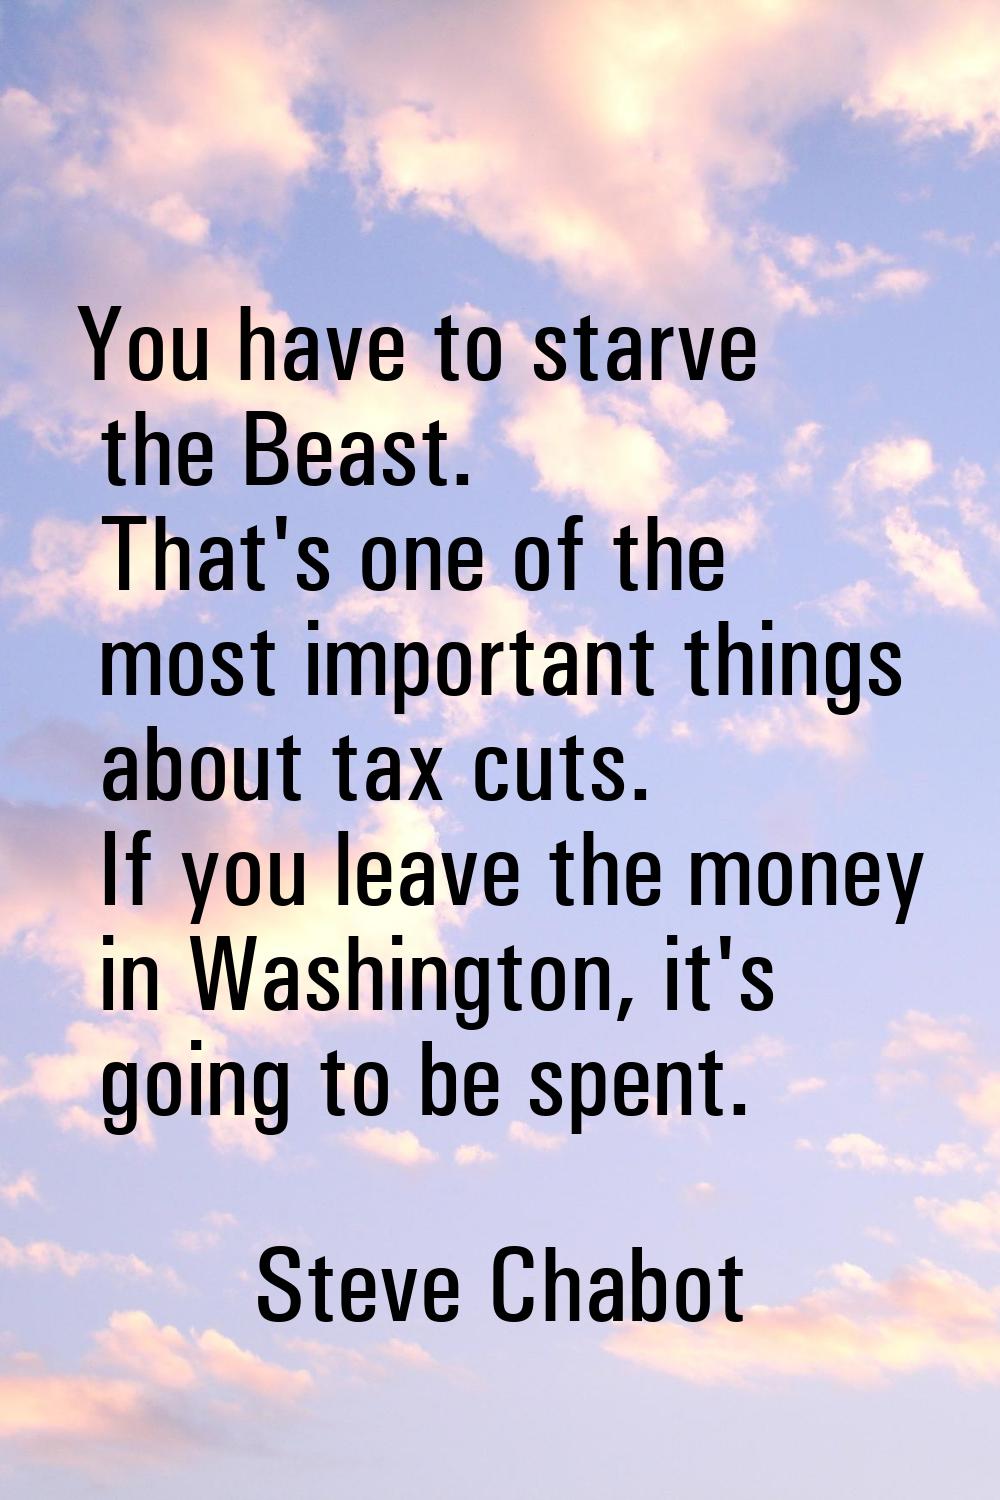 You have to starve the Beast. That's one of the most important things about tax cuts. If you leave 